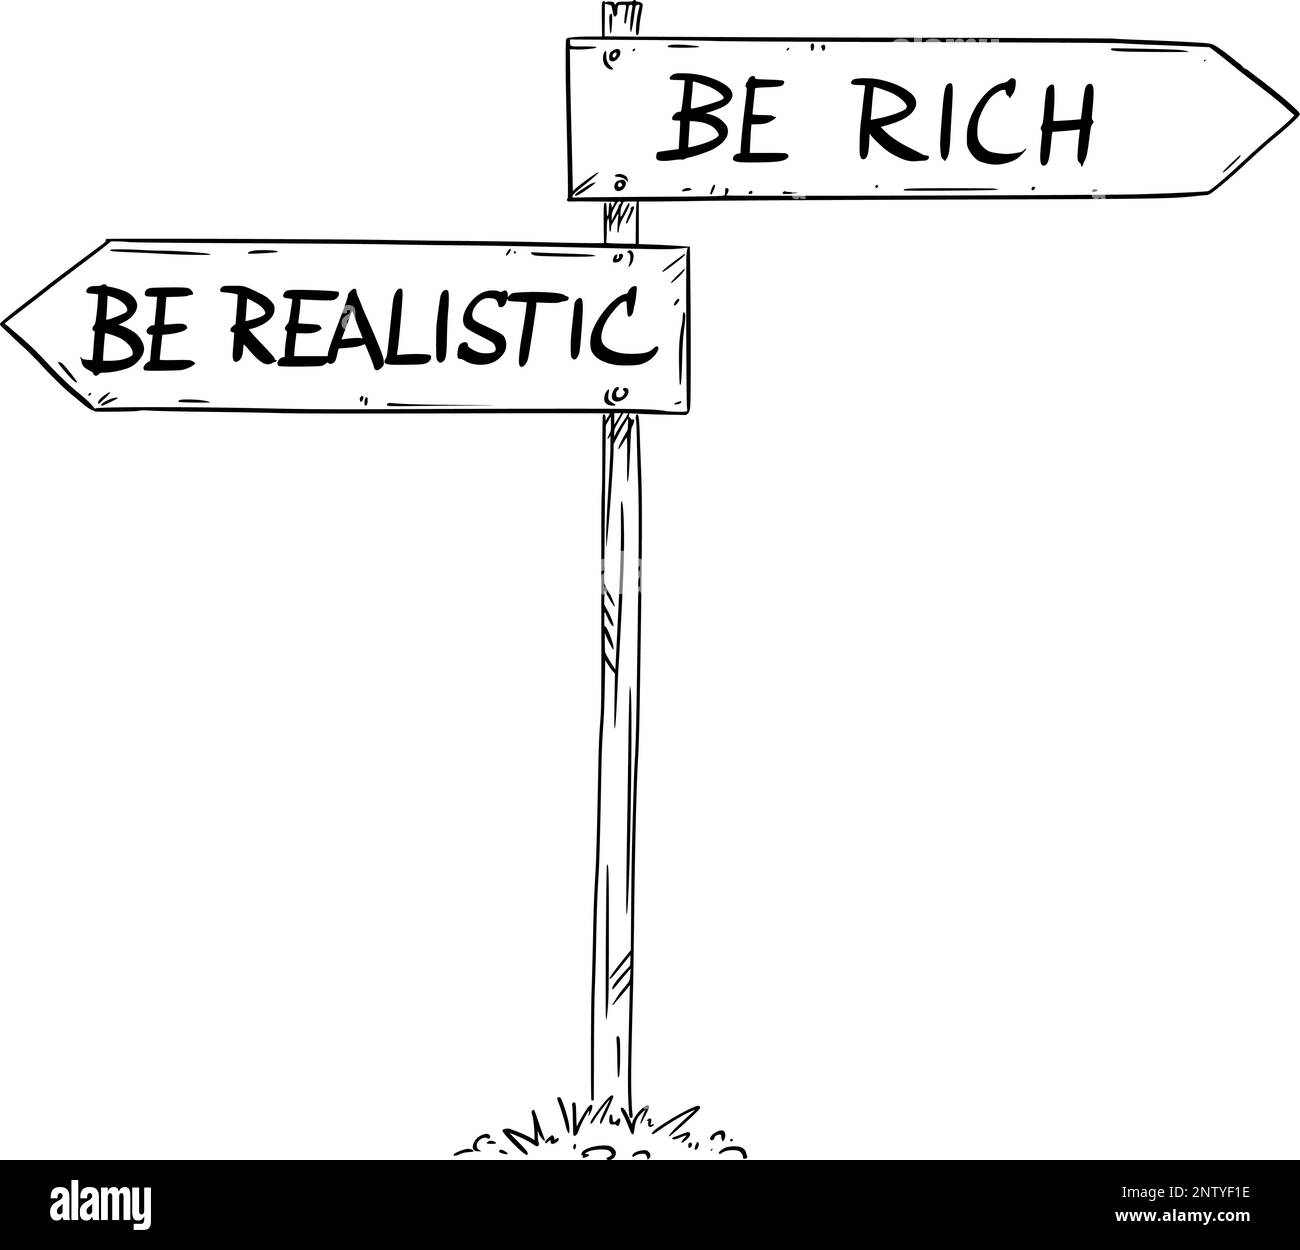 Be Realistic or Rich Decision , Vector Cartoon Illustration Stock Vector